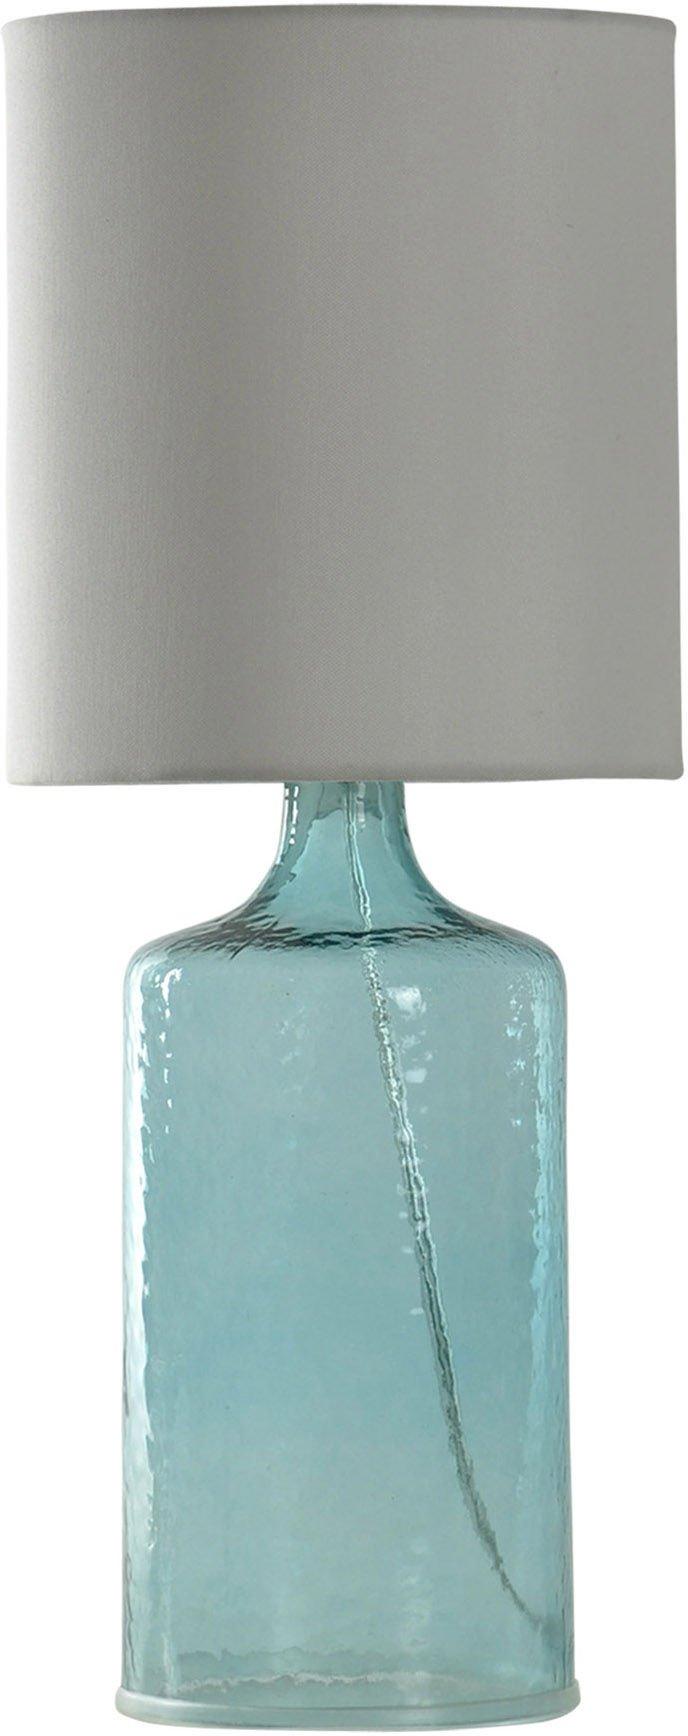 StyleCraft Tall Seeded Glass Table Lamp